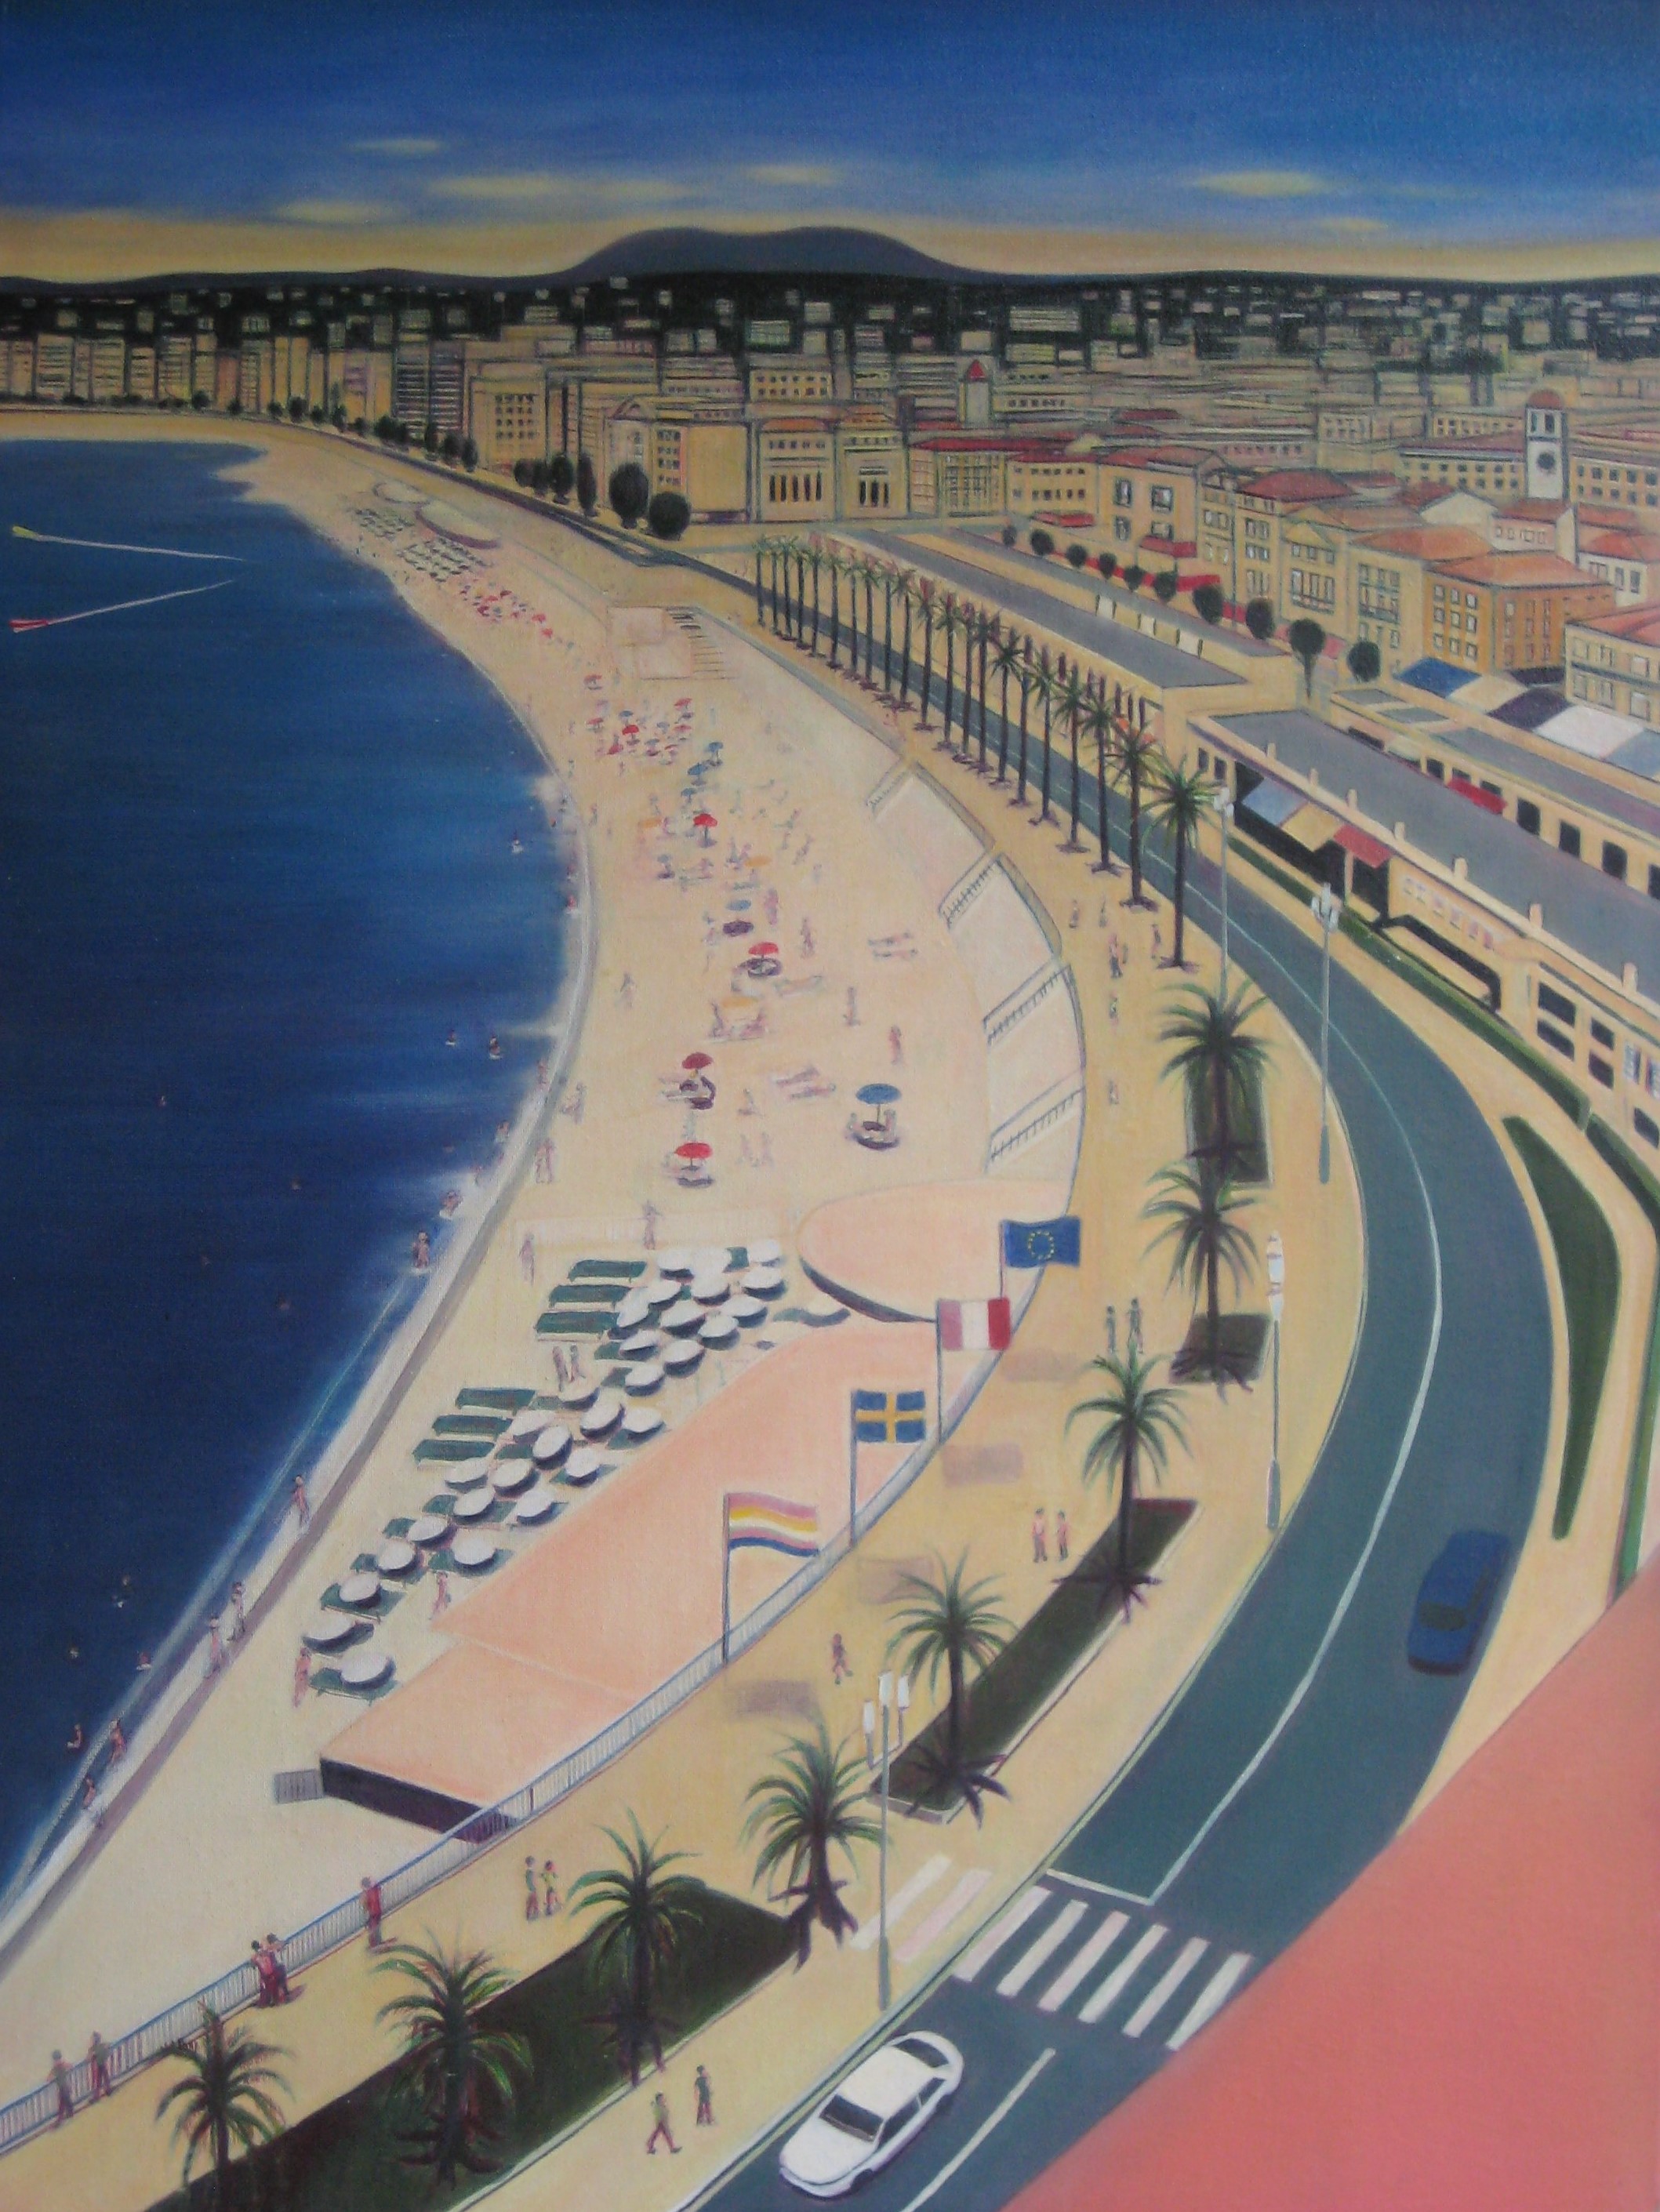 Painting of a beach scene from above